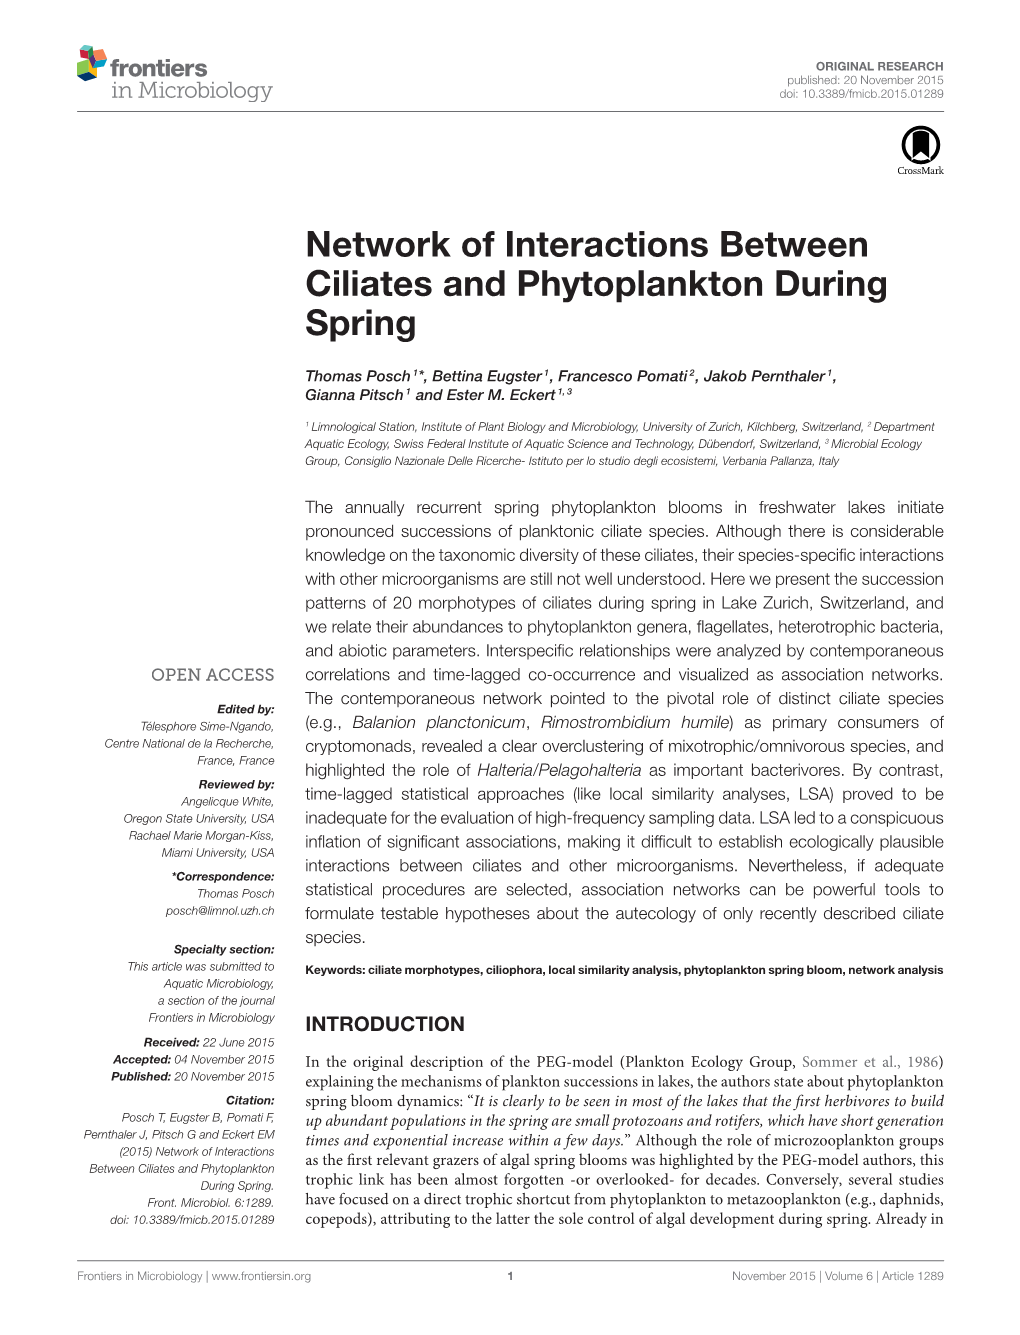 Network of Interactions Between Ciliates and Phytoplankton During Spring